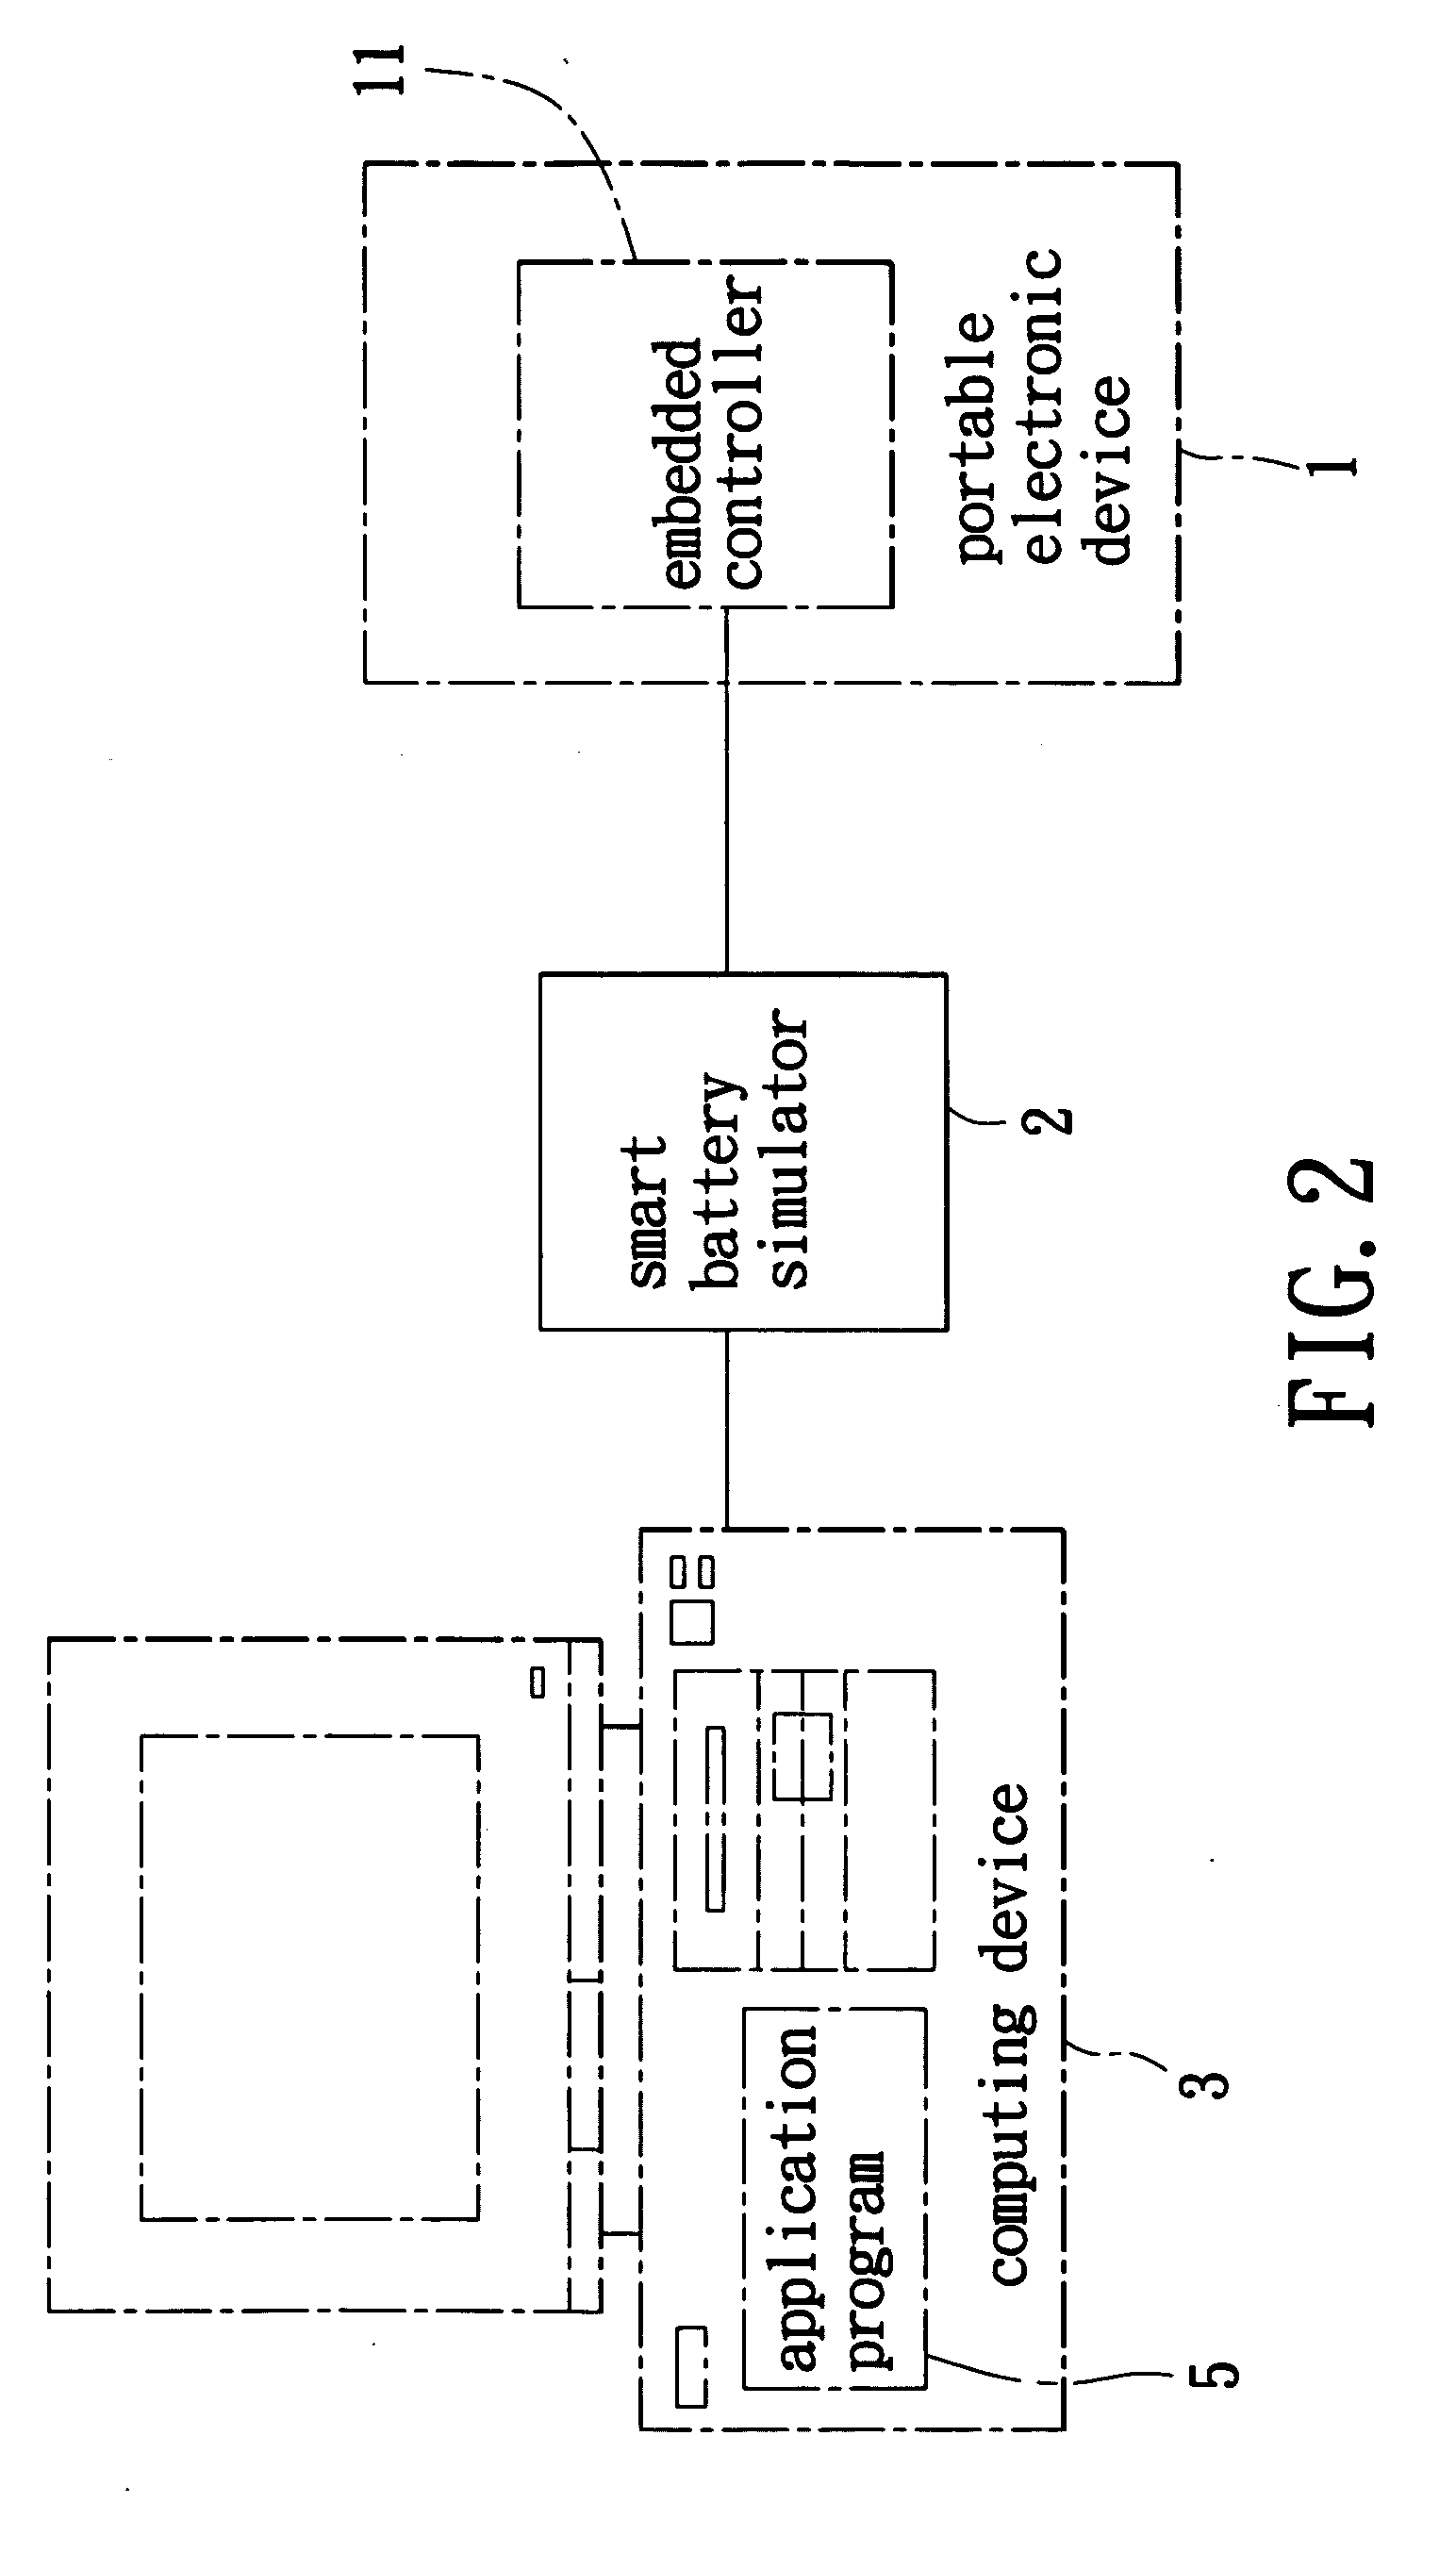 Smart battery simulating system